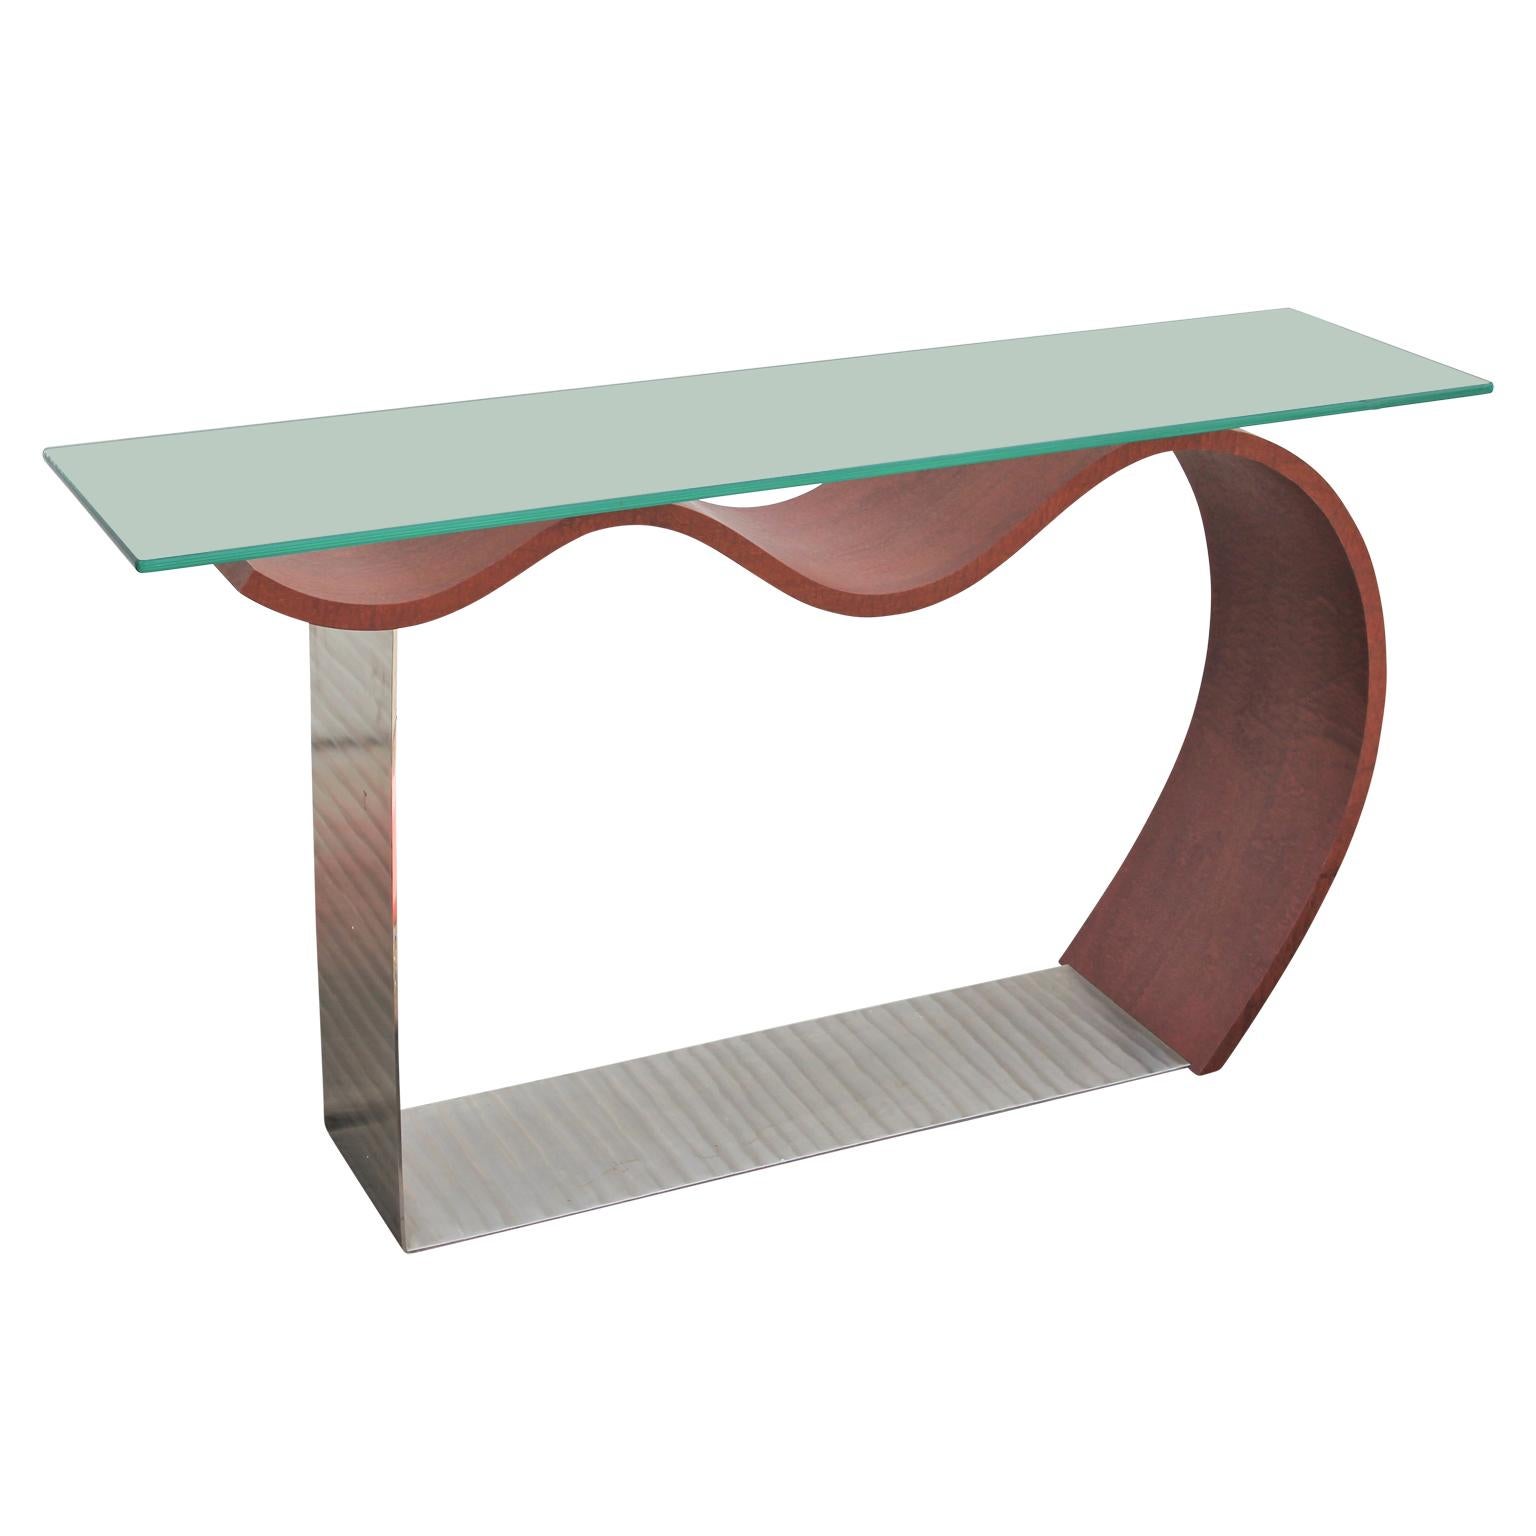 Fantastic quality and design, this console table features steamed bent wood, steel, and glass.

Richard Judd, born 1953 in Marshfield, WI. Attended the University of Wisconsin, Madison (1971-1973) and Milwaukee (B.S. in Architecture, 1975). Work